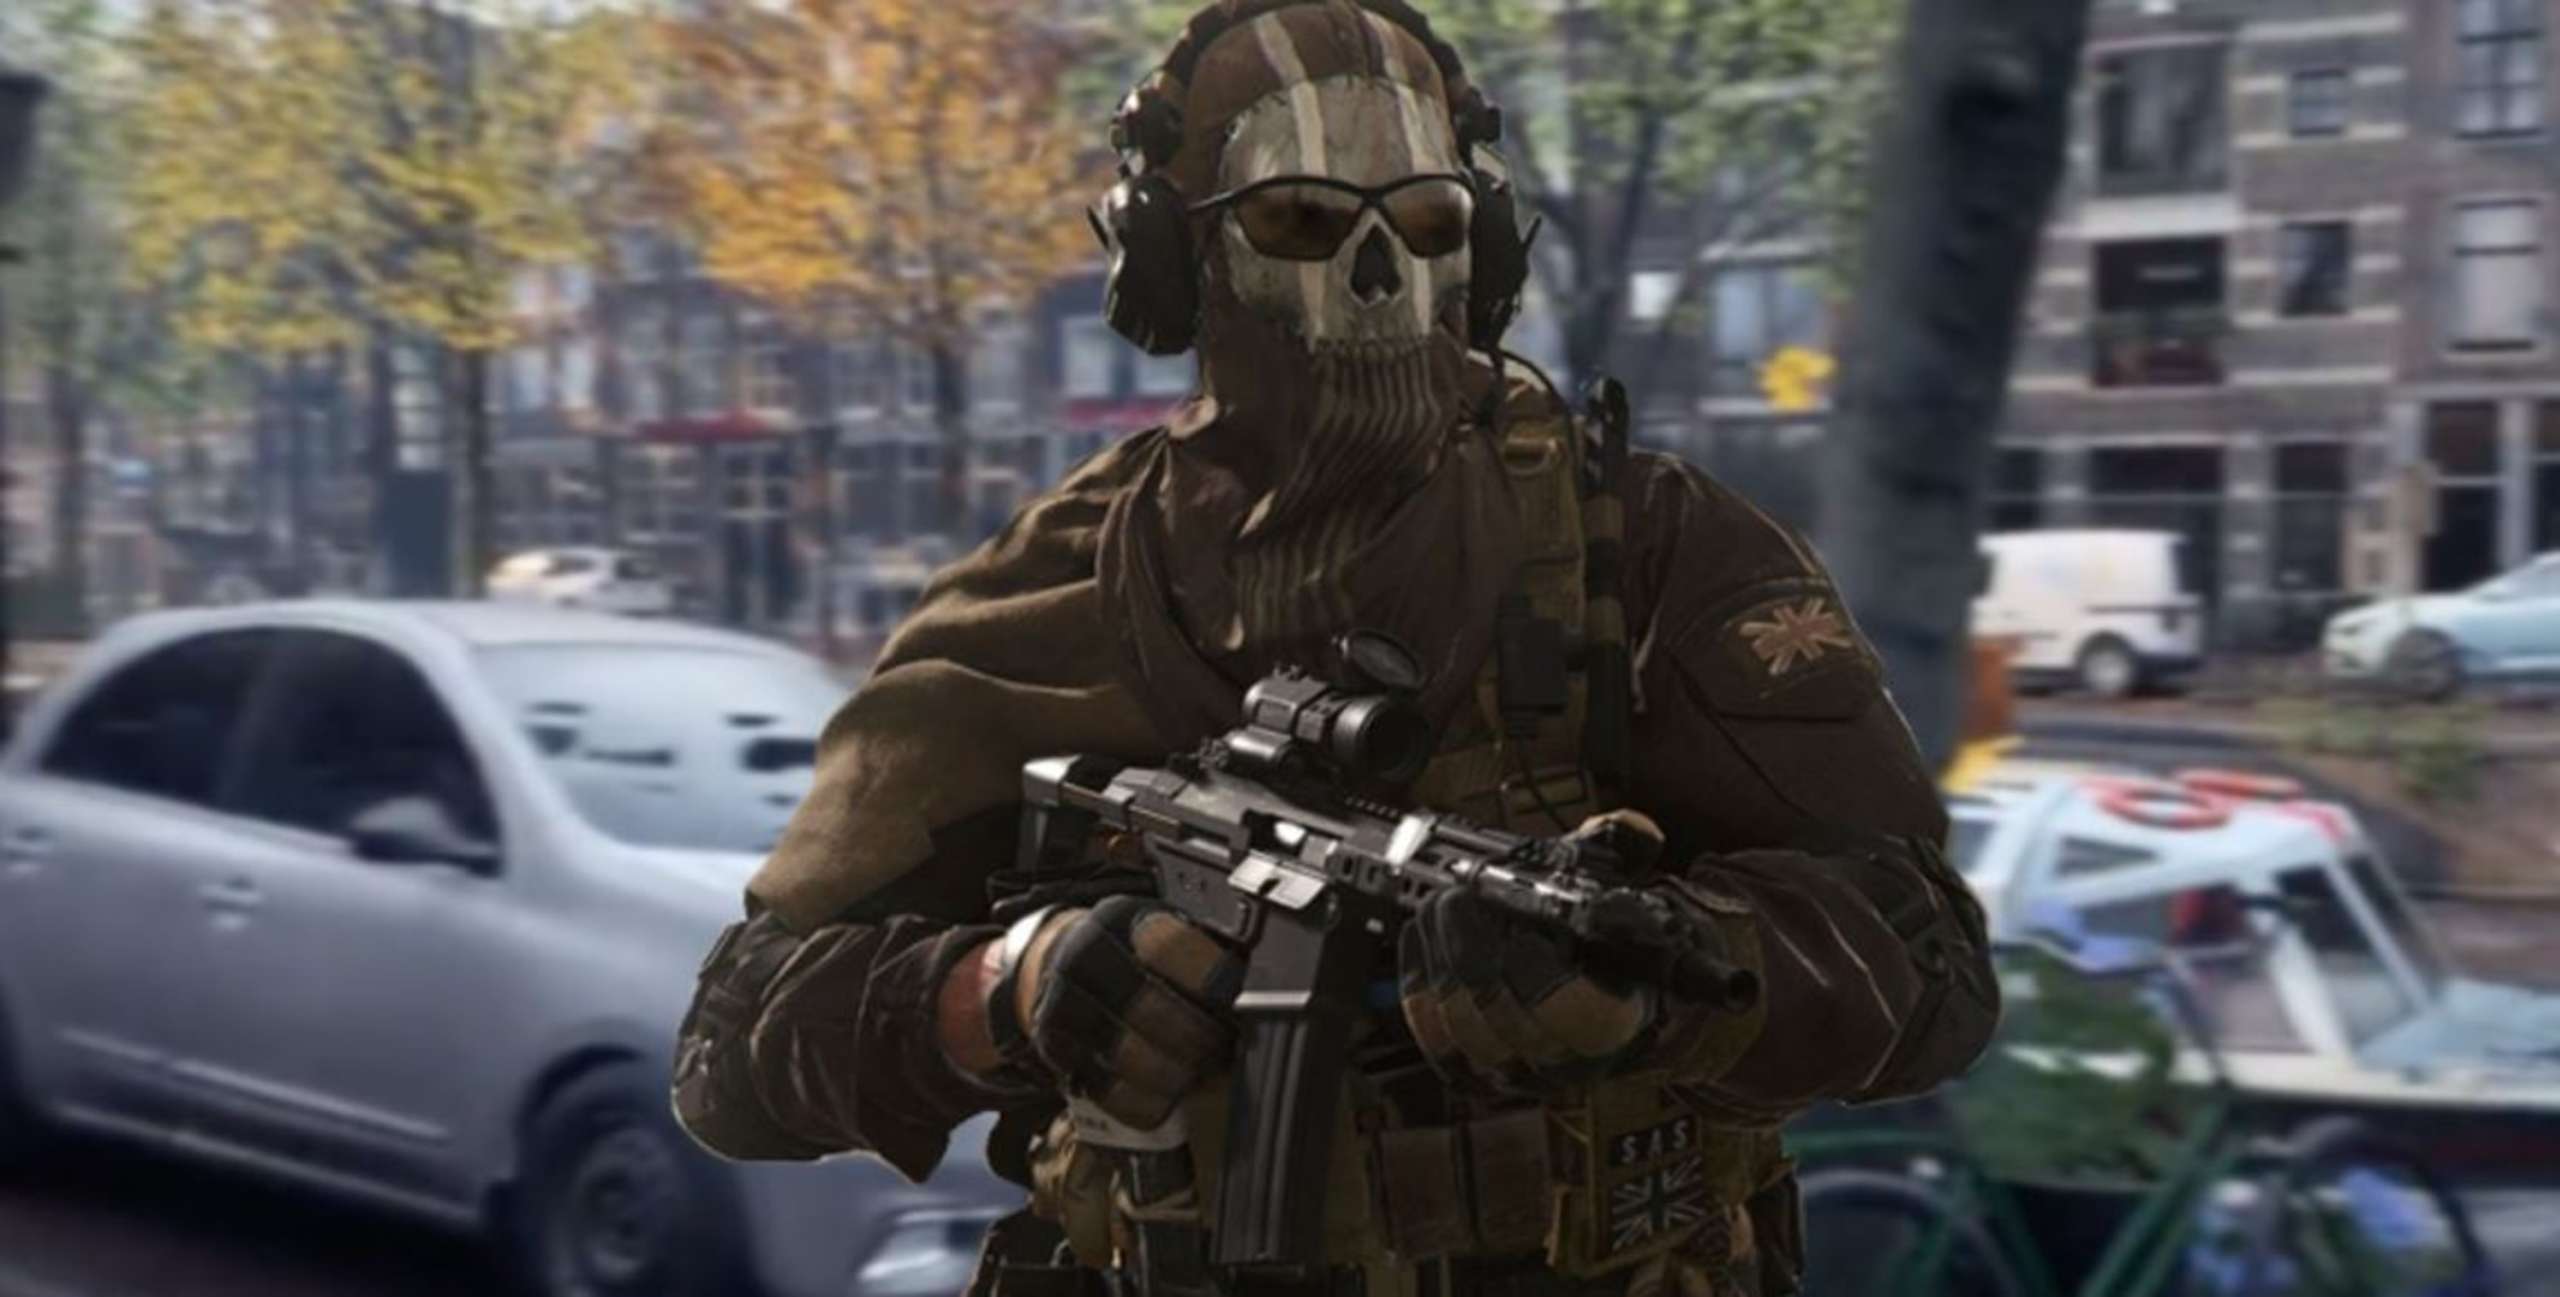 The Visuals In Modern Warfare 2 Are Stunning, And The Game’s Version Of Amsterdam Is Remarkably Accurate To The Real Thing